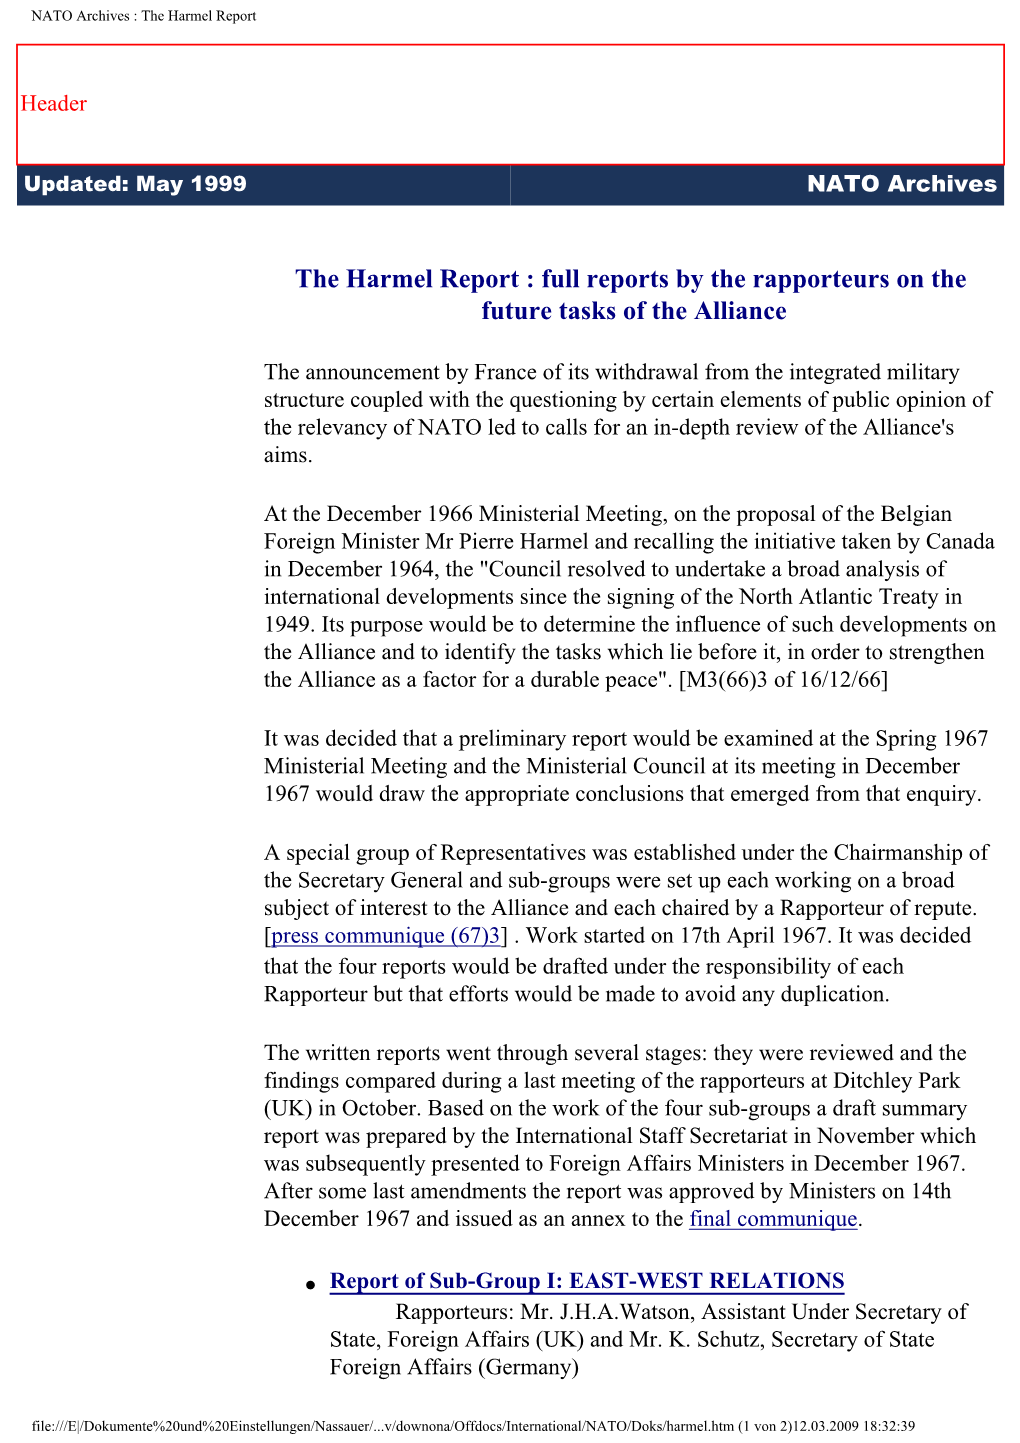 The Harmel Report : Full Reports by the Rapporteurs on the Future Tasks of the Alliance